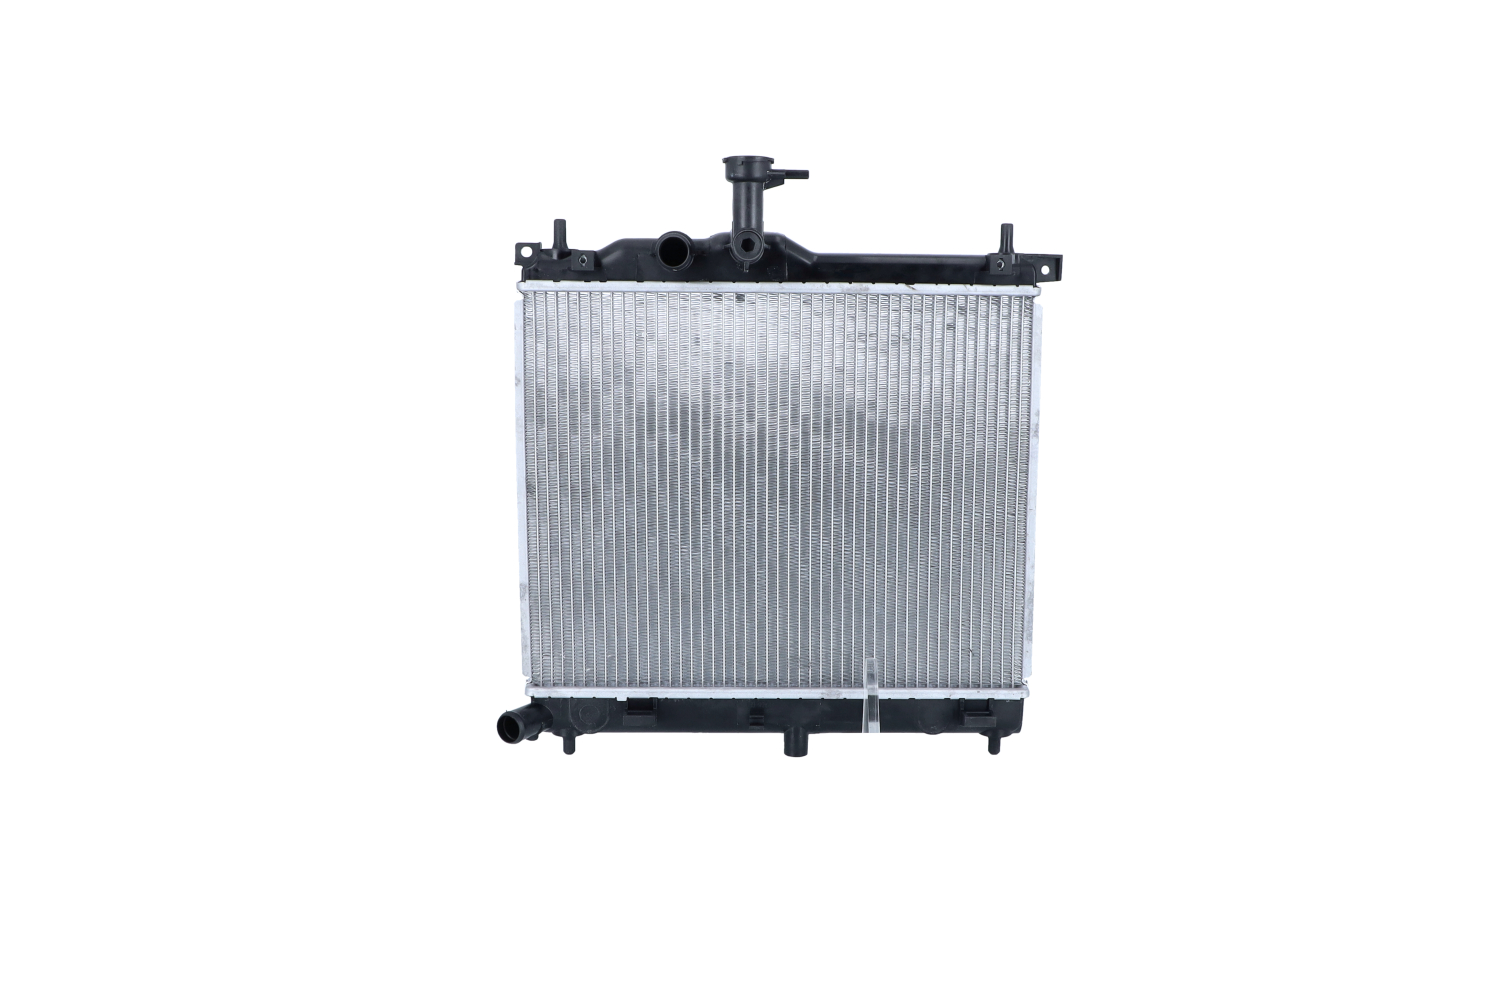 NRF 53029 Engine radiator Aluminium, 447 x 351 x 17 mm, with mounting parts, Brazed cooling fins